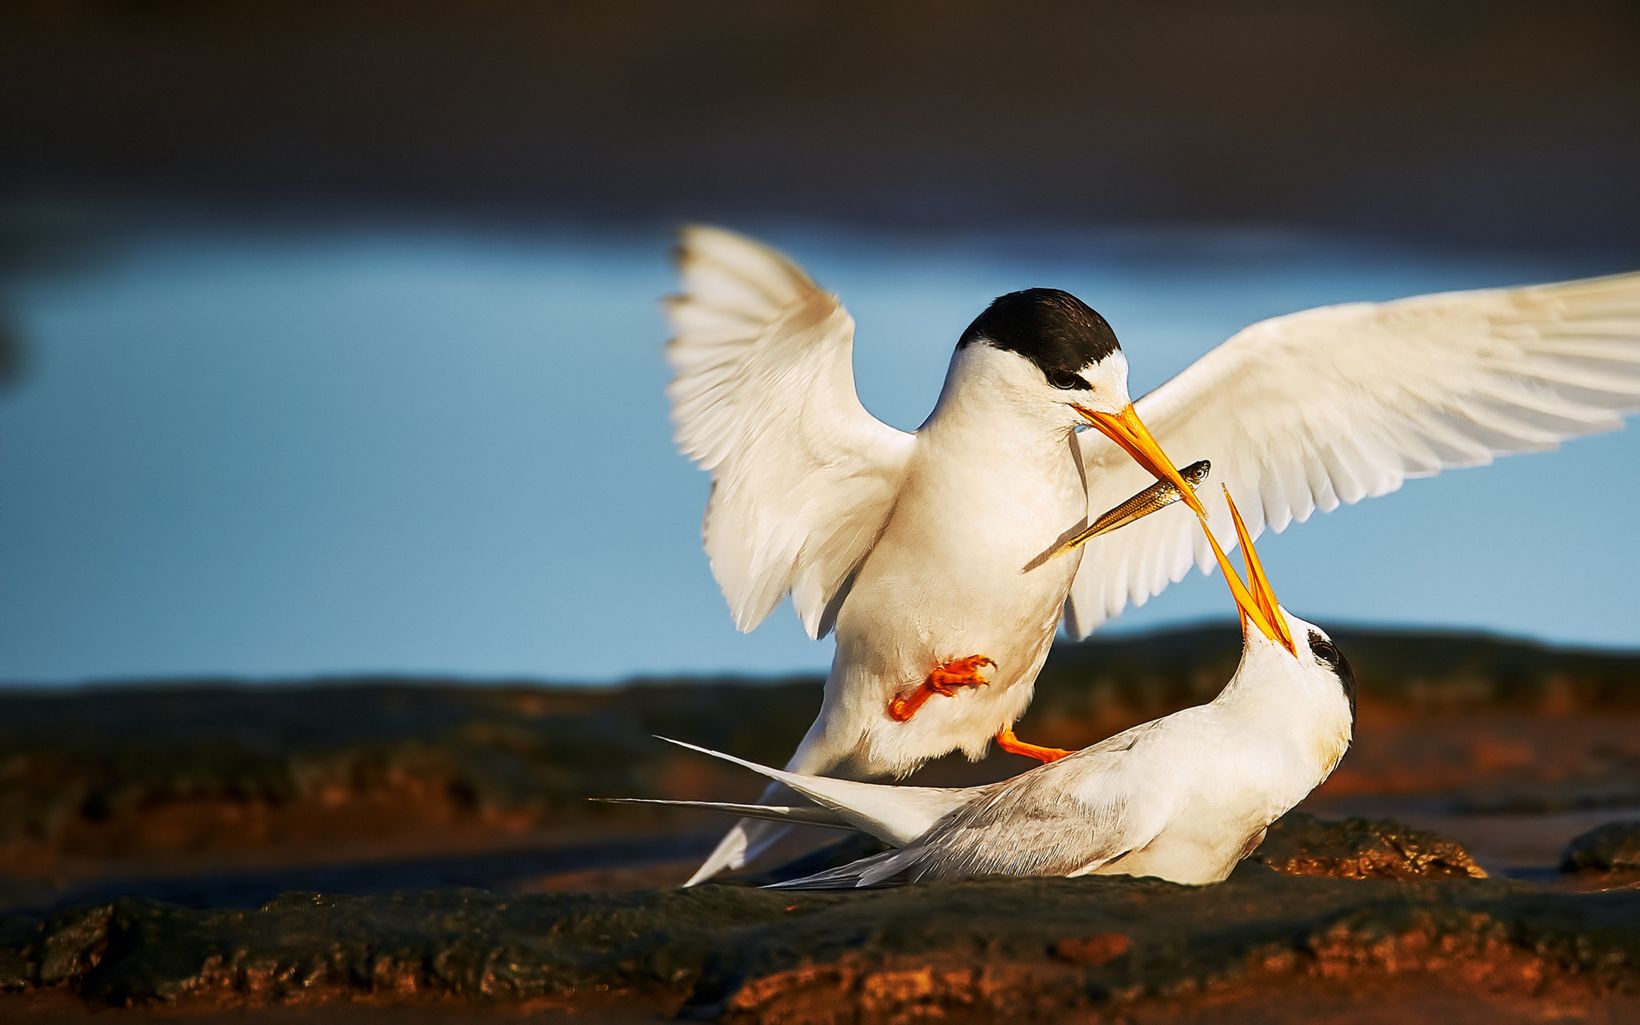 Fairy terns Research shows that its numbers have been decreasing rapidly throughout its range © Les Imgrund